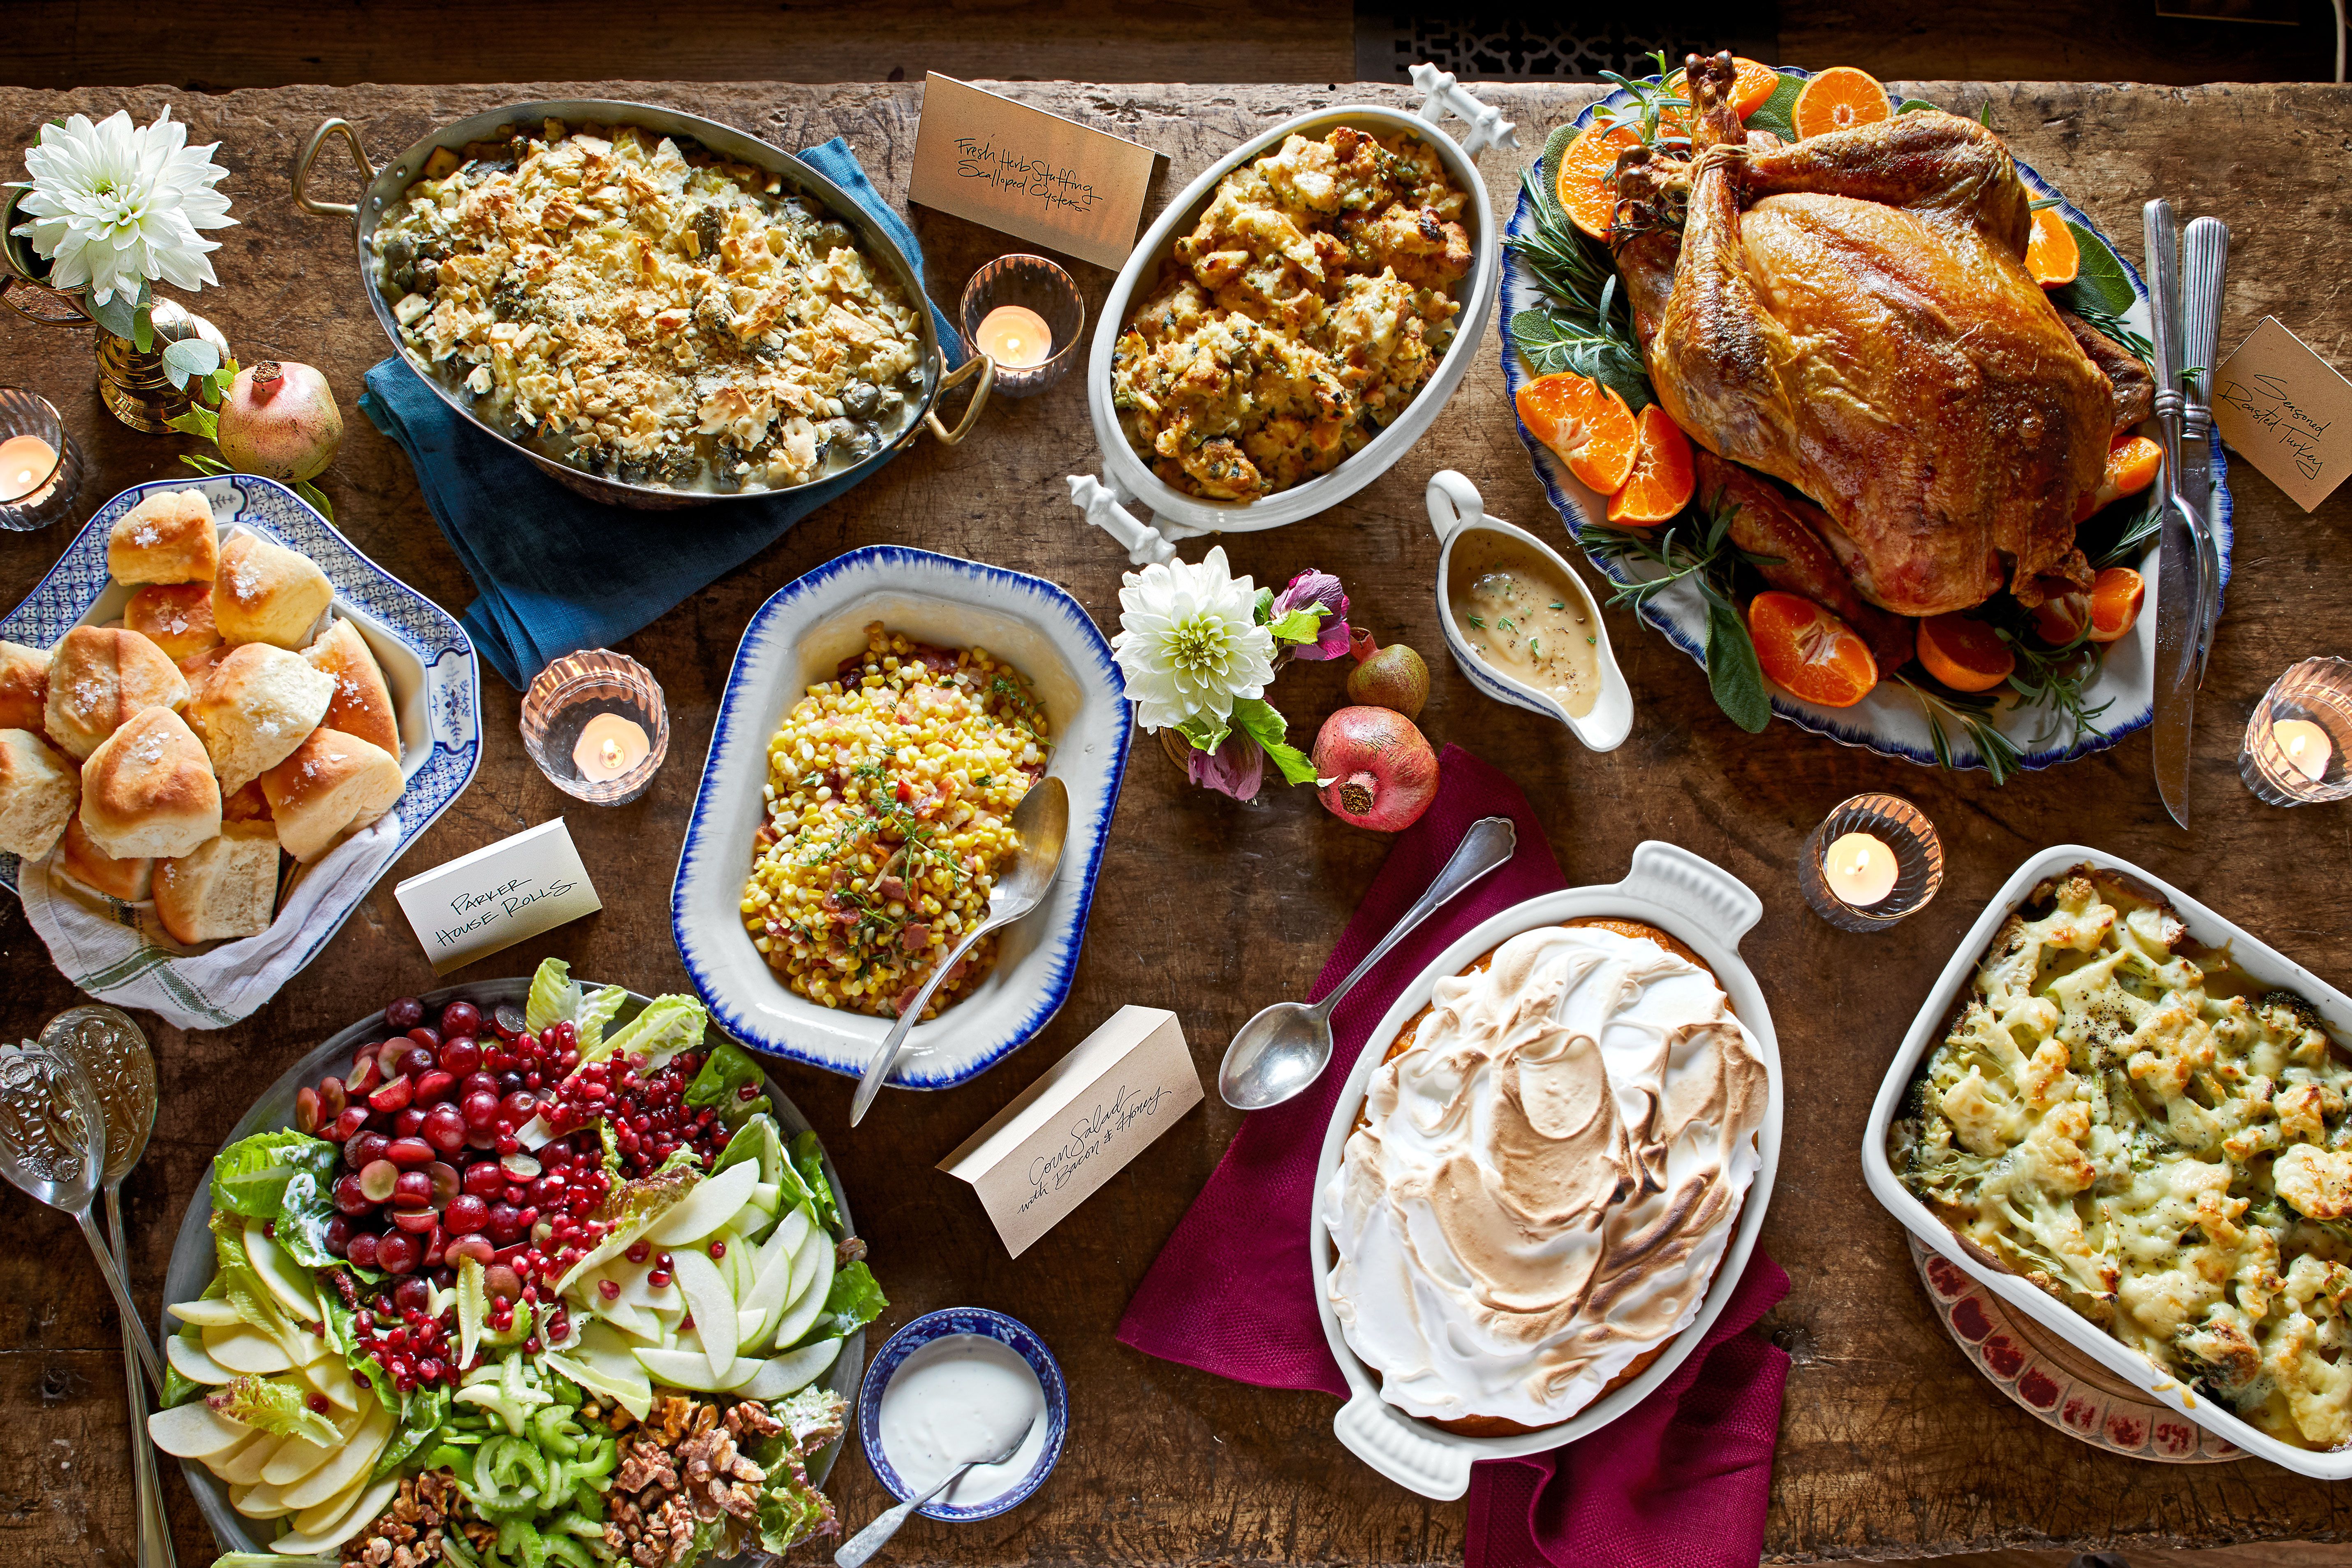 III. Essential Steps for Planning a Successful Thanksgiving Feast